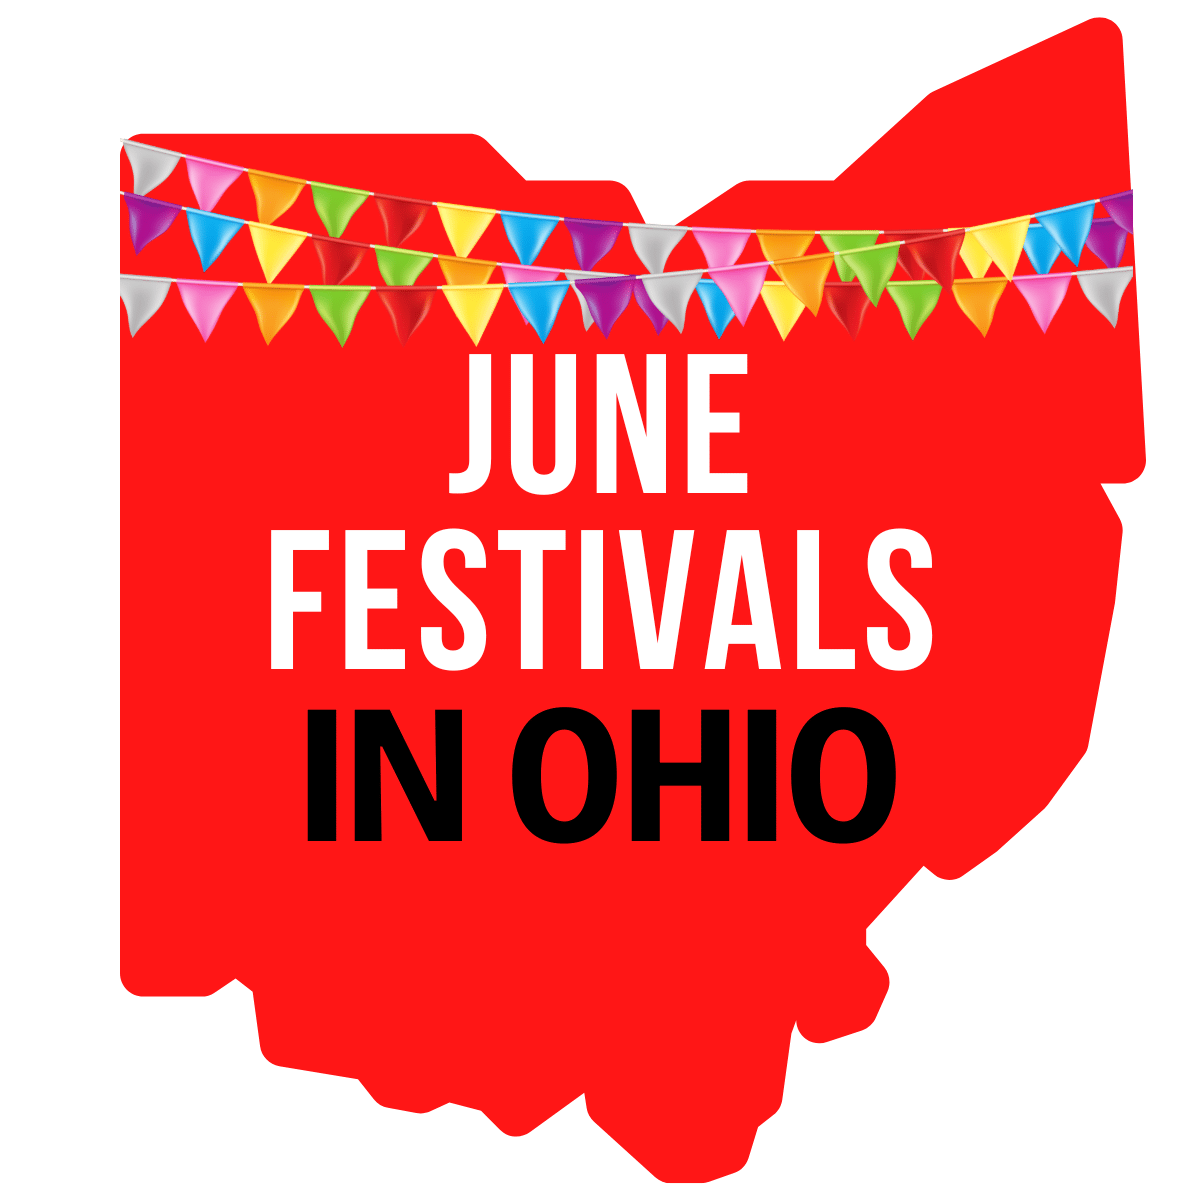 A square image of a red print of Ohio with colorful flags strung across it. It has text June Festivals in Ohio in white and black letters.